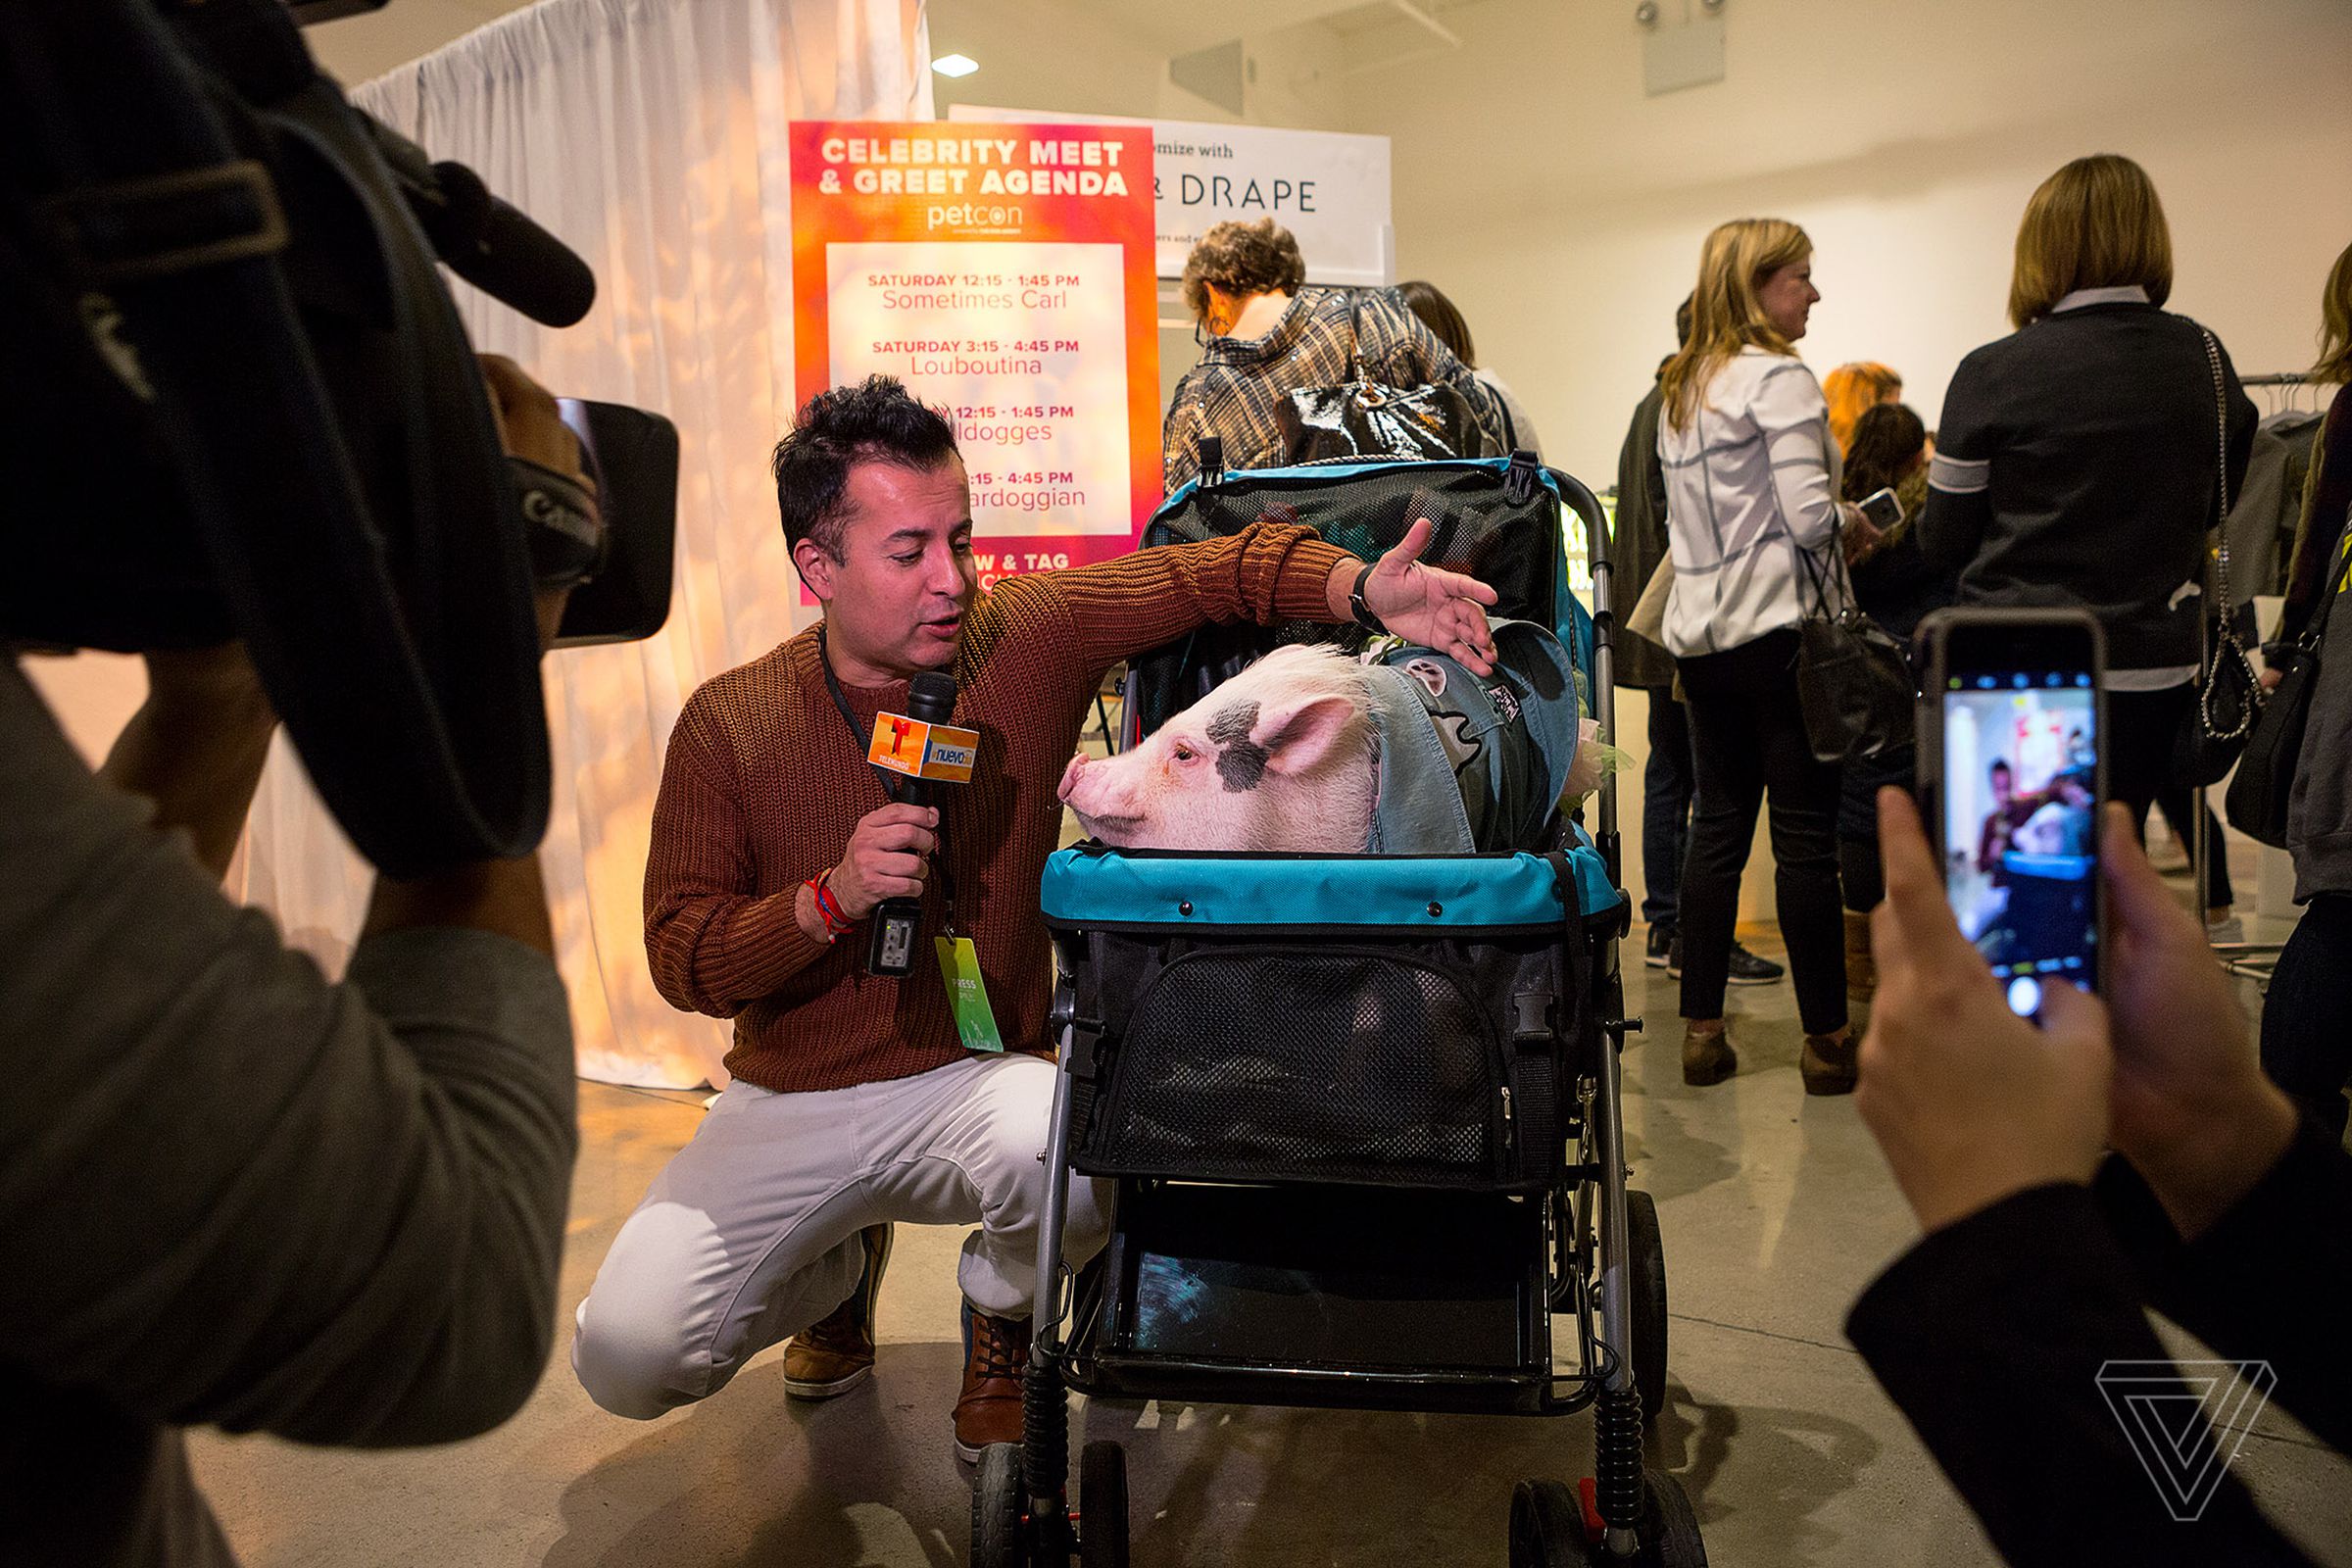 Hamlet (@hamlet_the_piggy) is surrounded by admirers and press at PetCon. Hamlet’s owner, Melanie Garcia, quit her full-time job a year ago to focus on creating content.